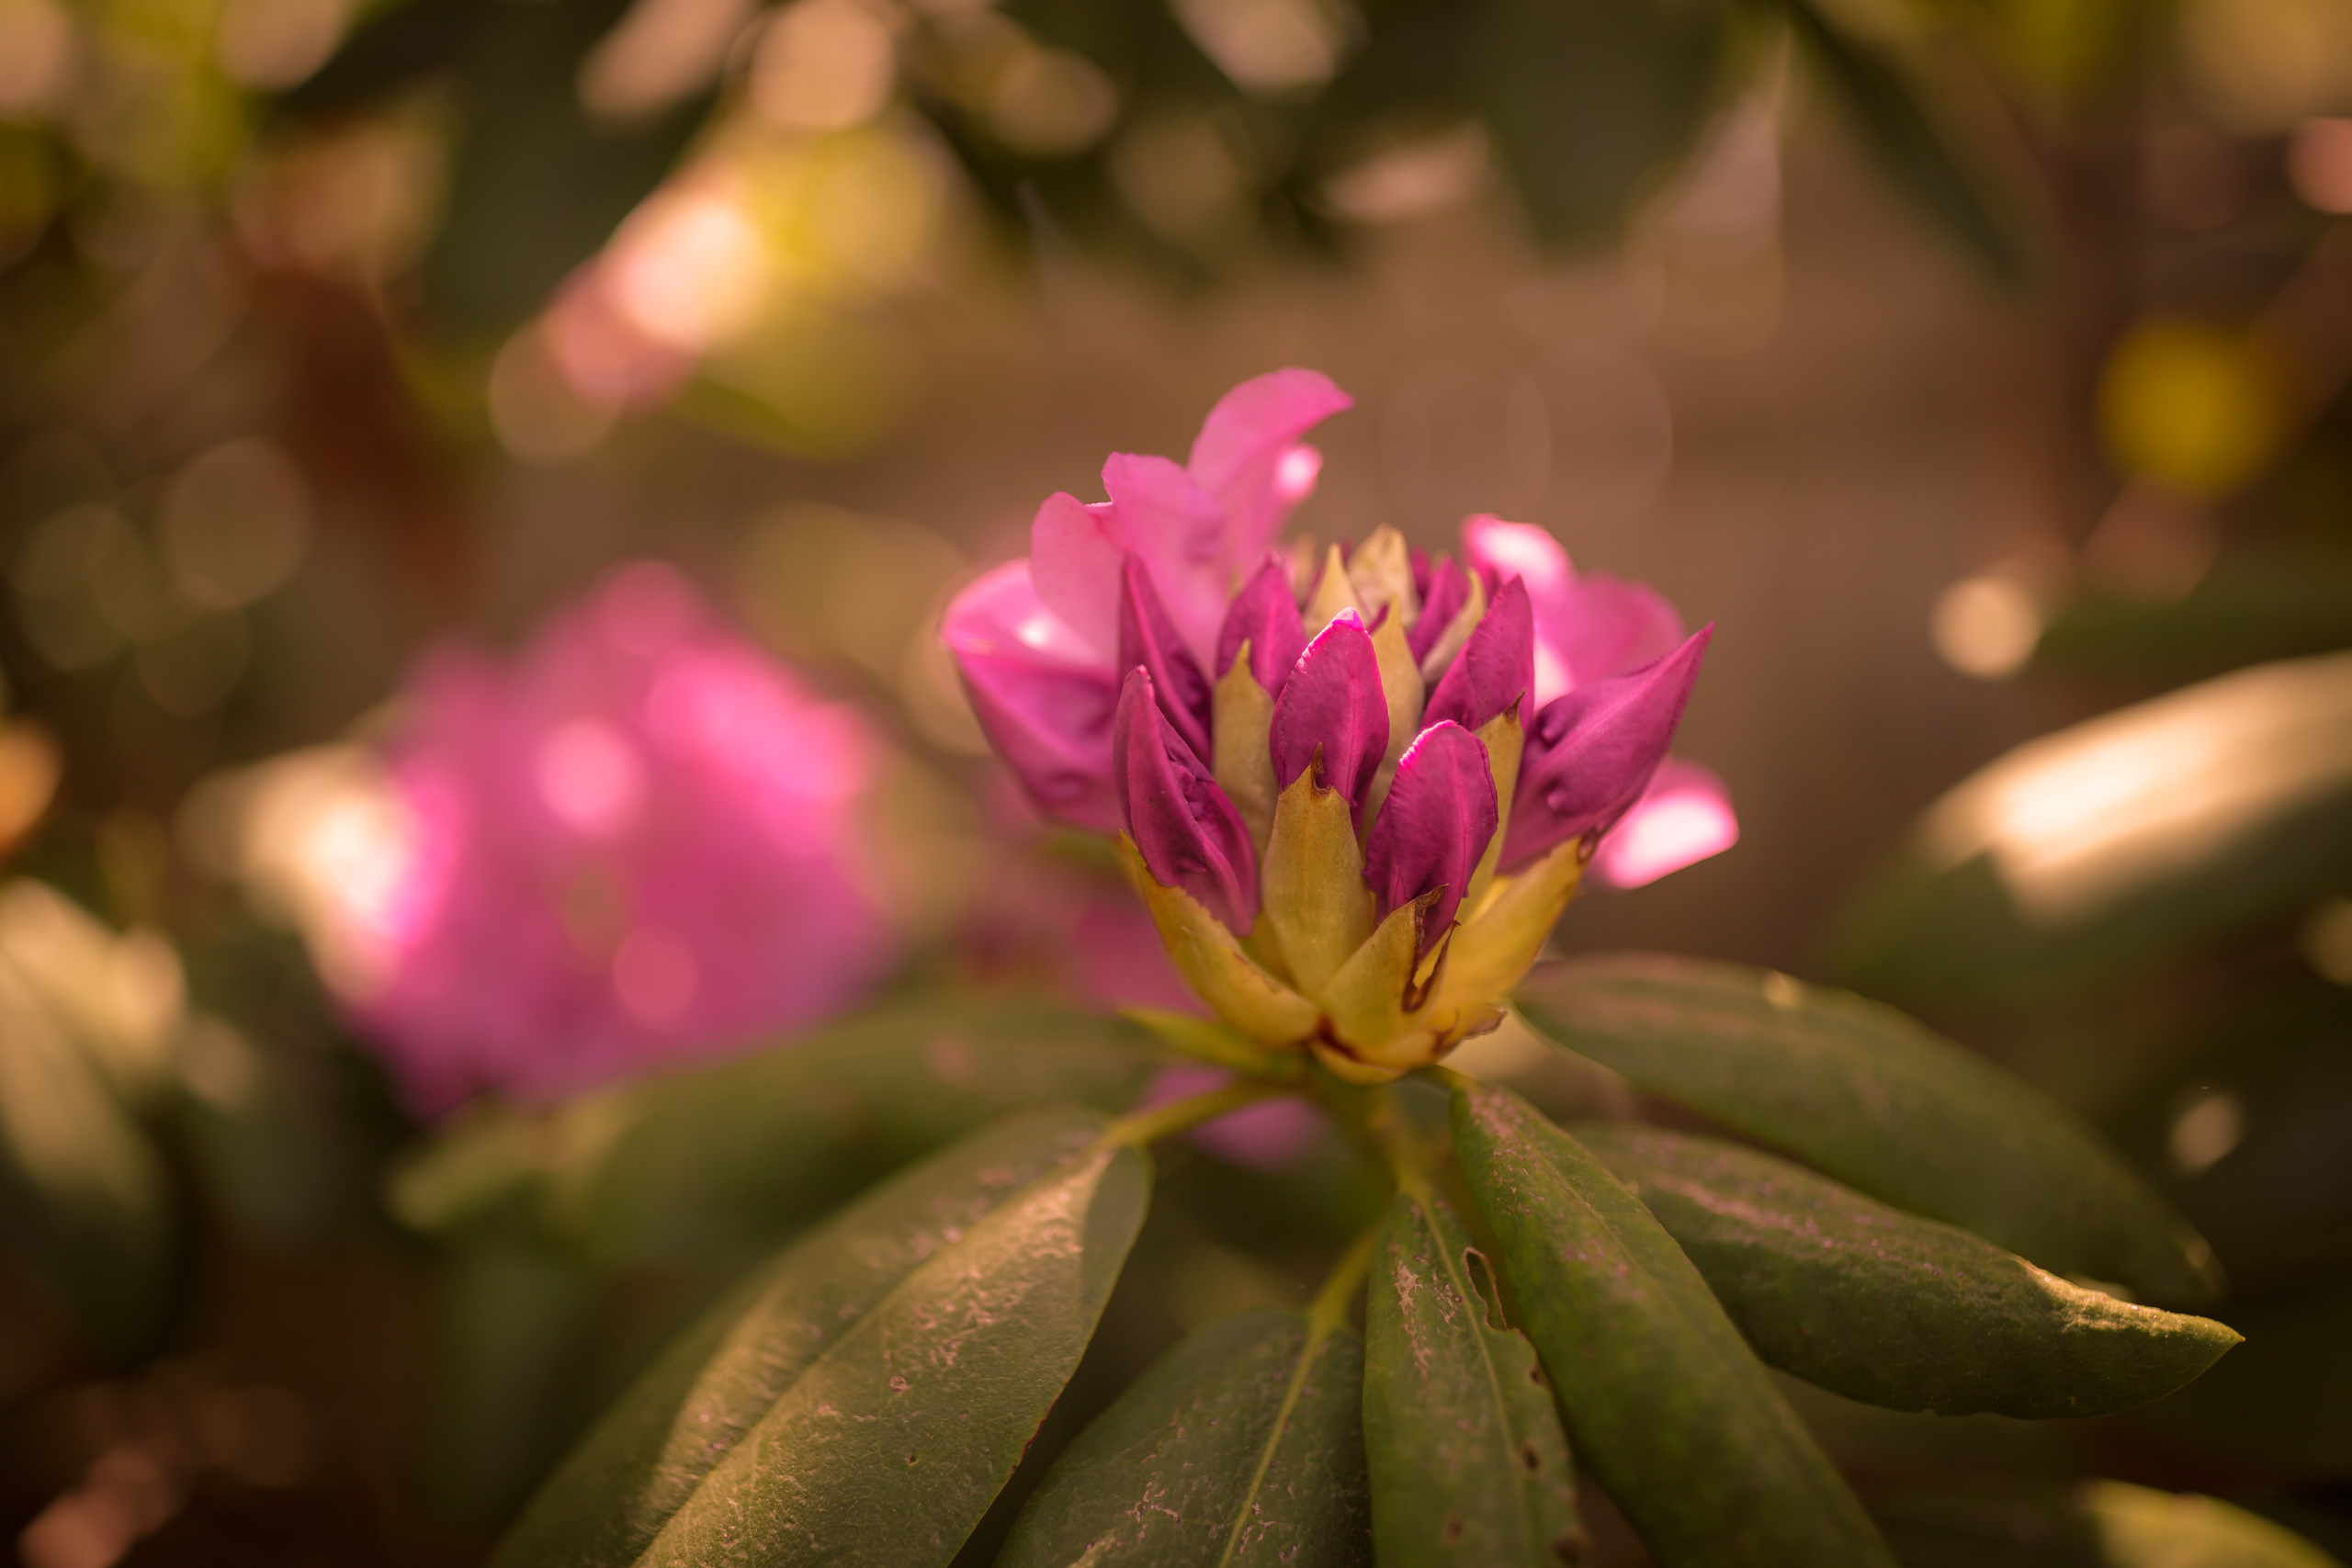 Shallow depth of field photograph of a blooming pink rhododendron bud.